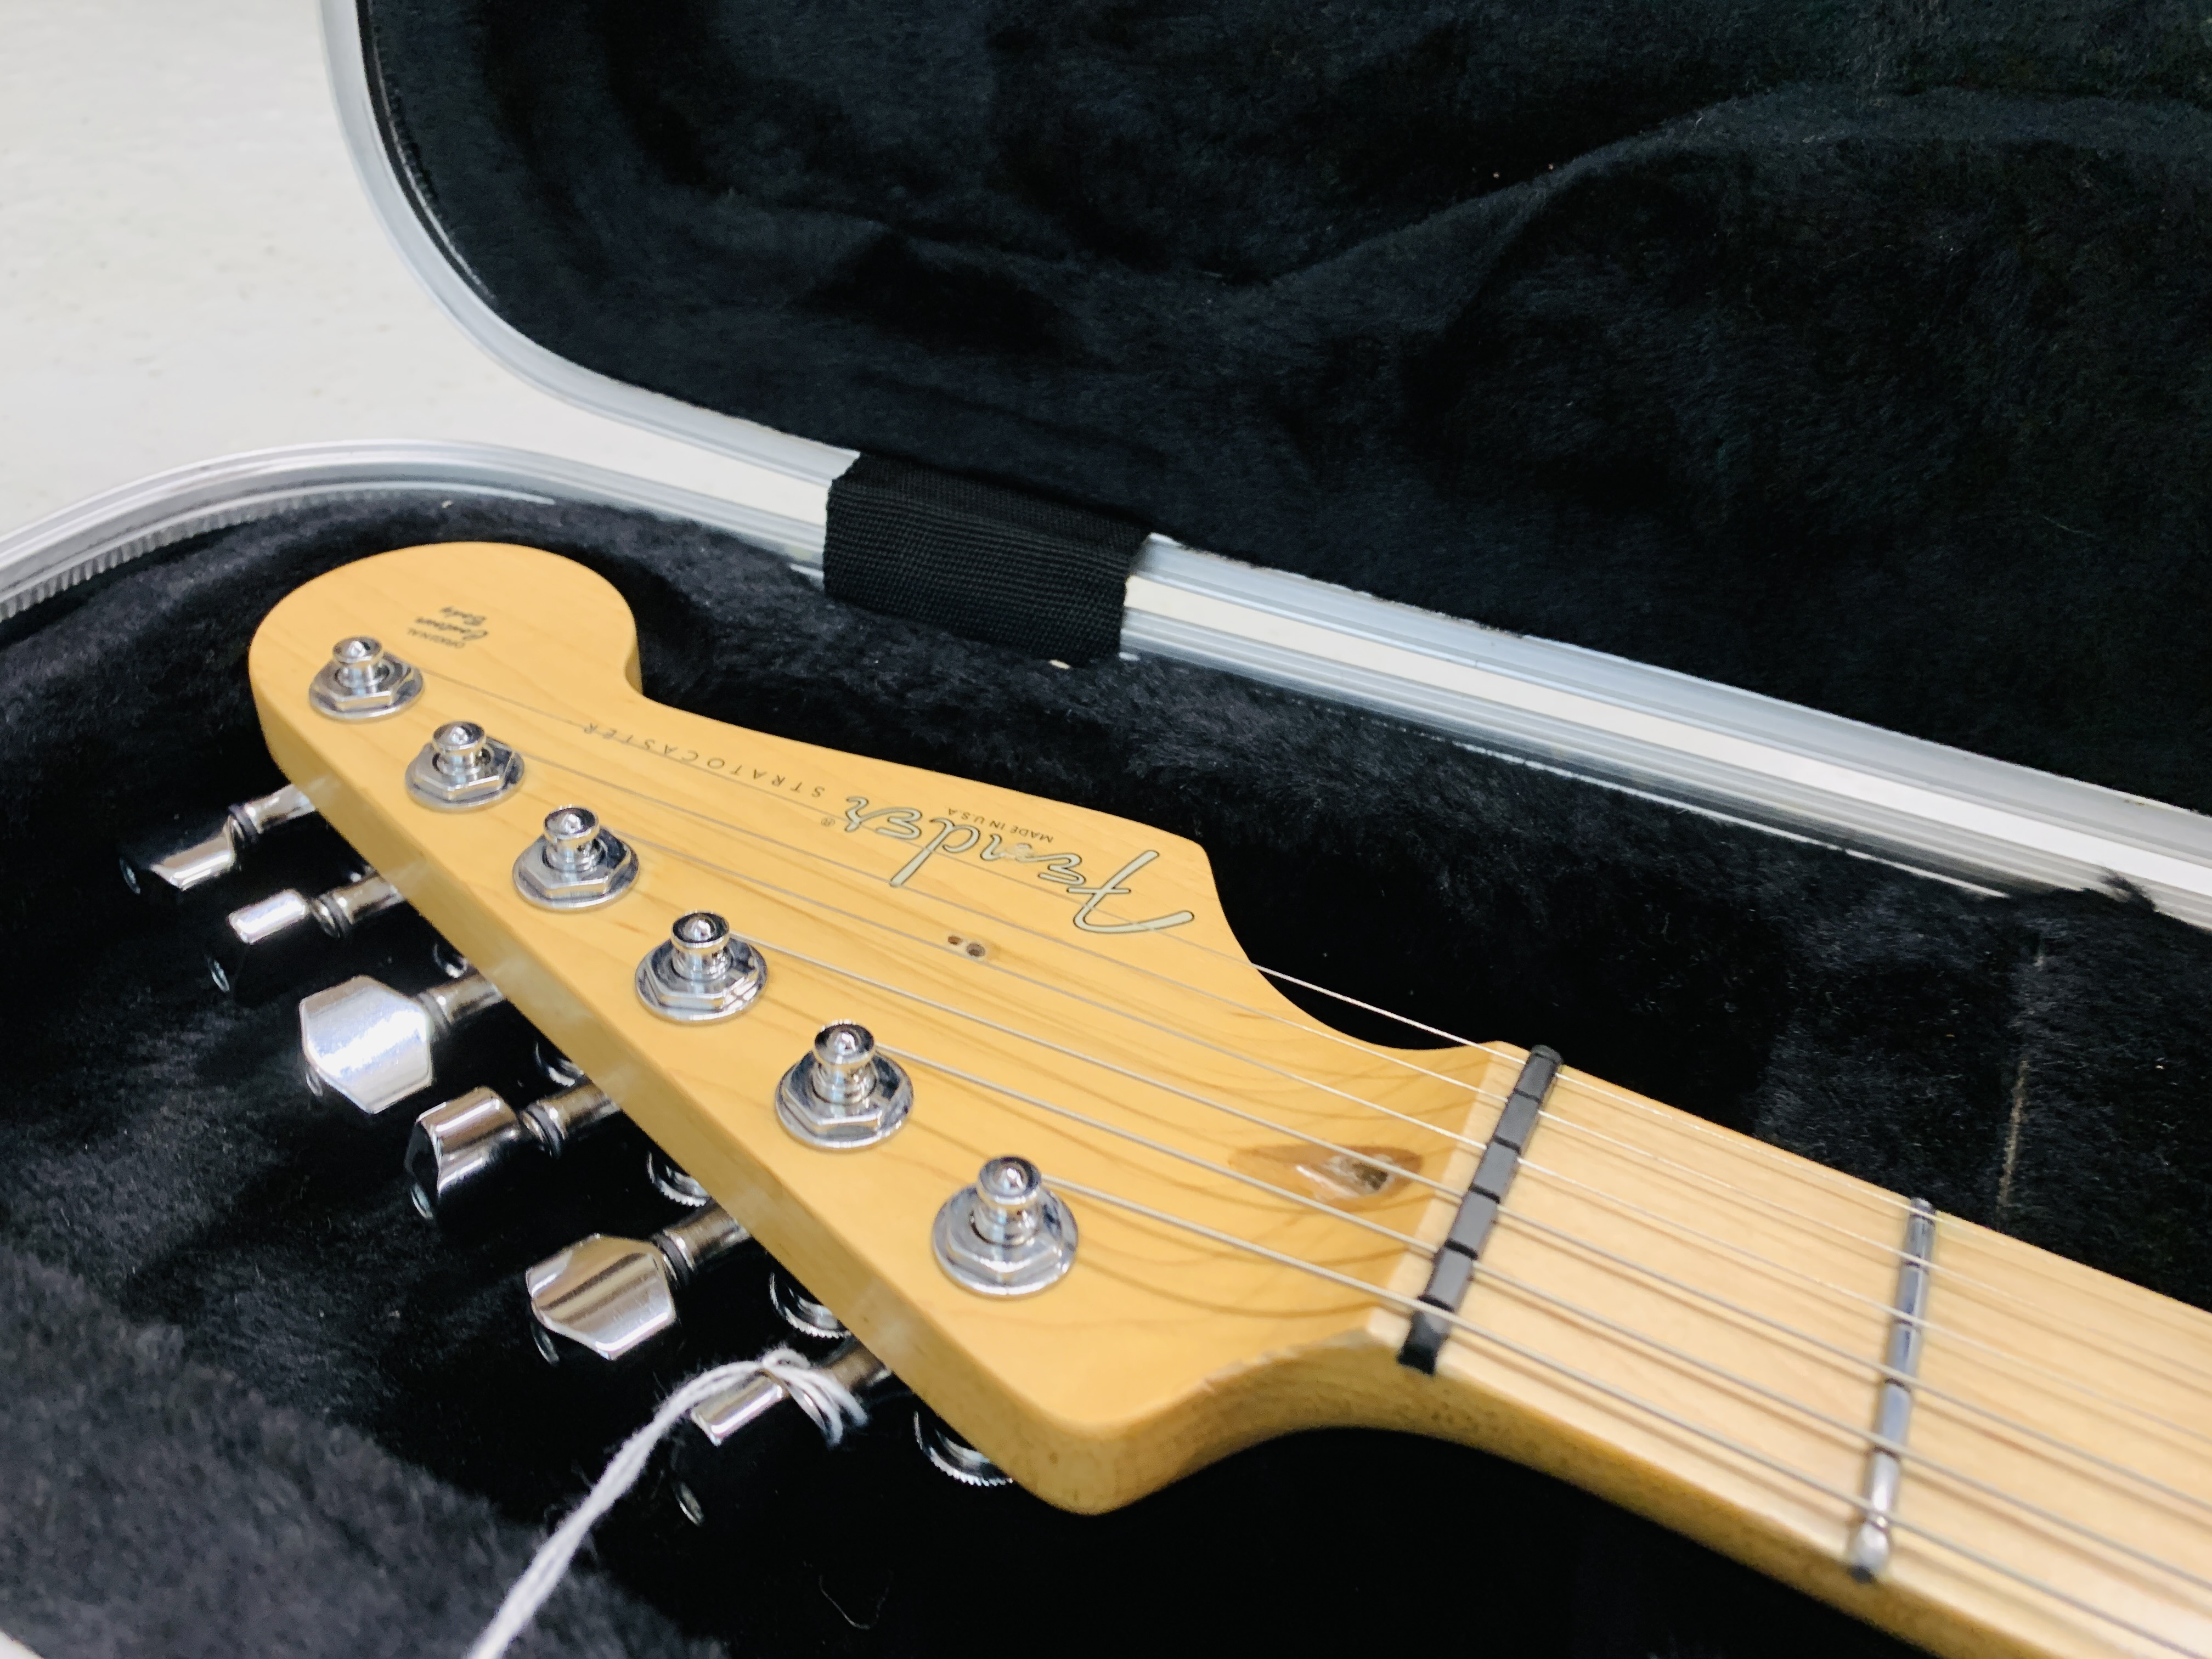 1 X UPGRADED USA FENDER STRATOCASTER GUITAR. - Image 3 of 10